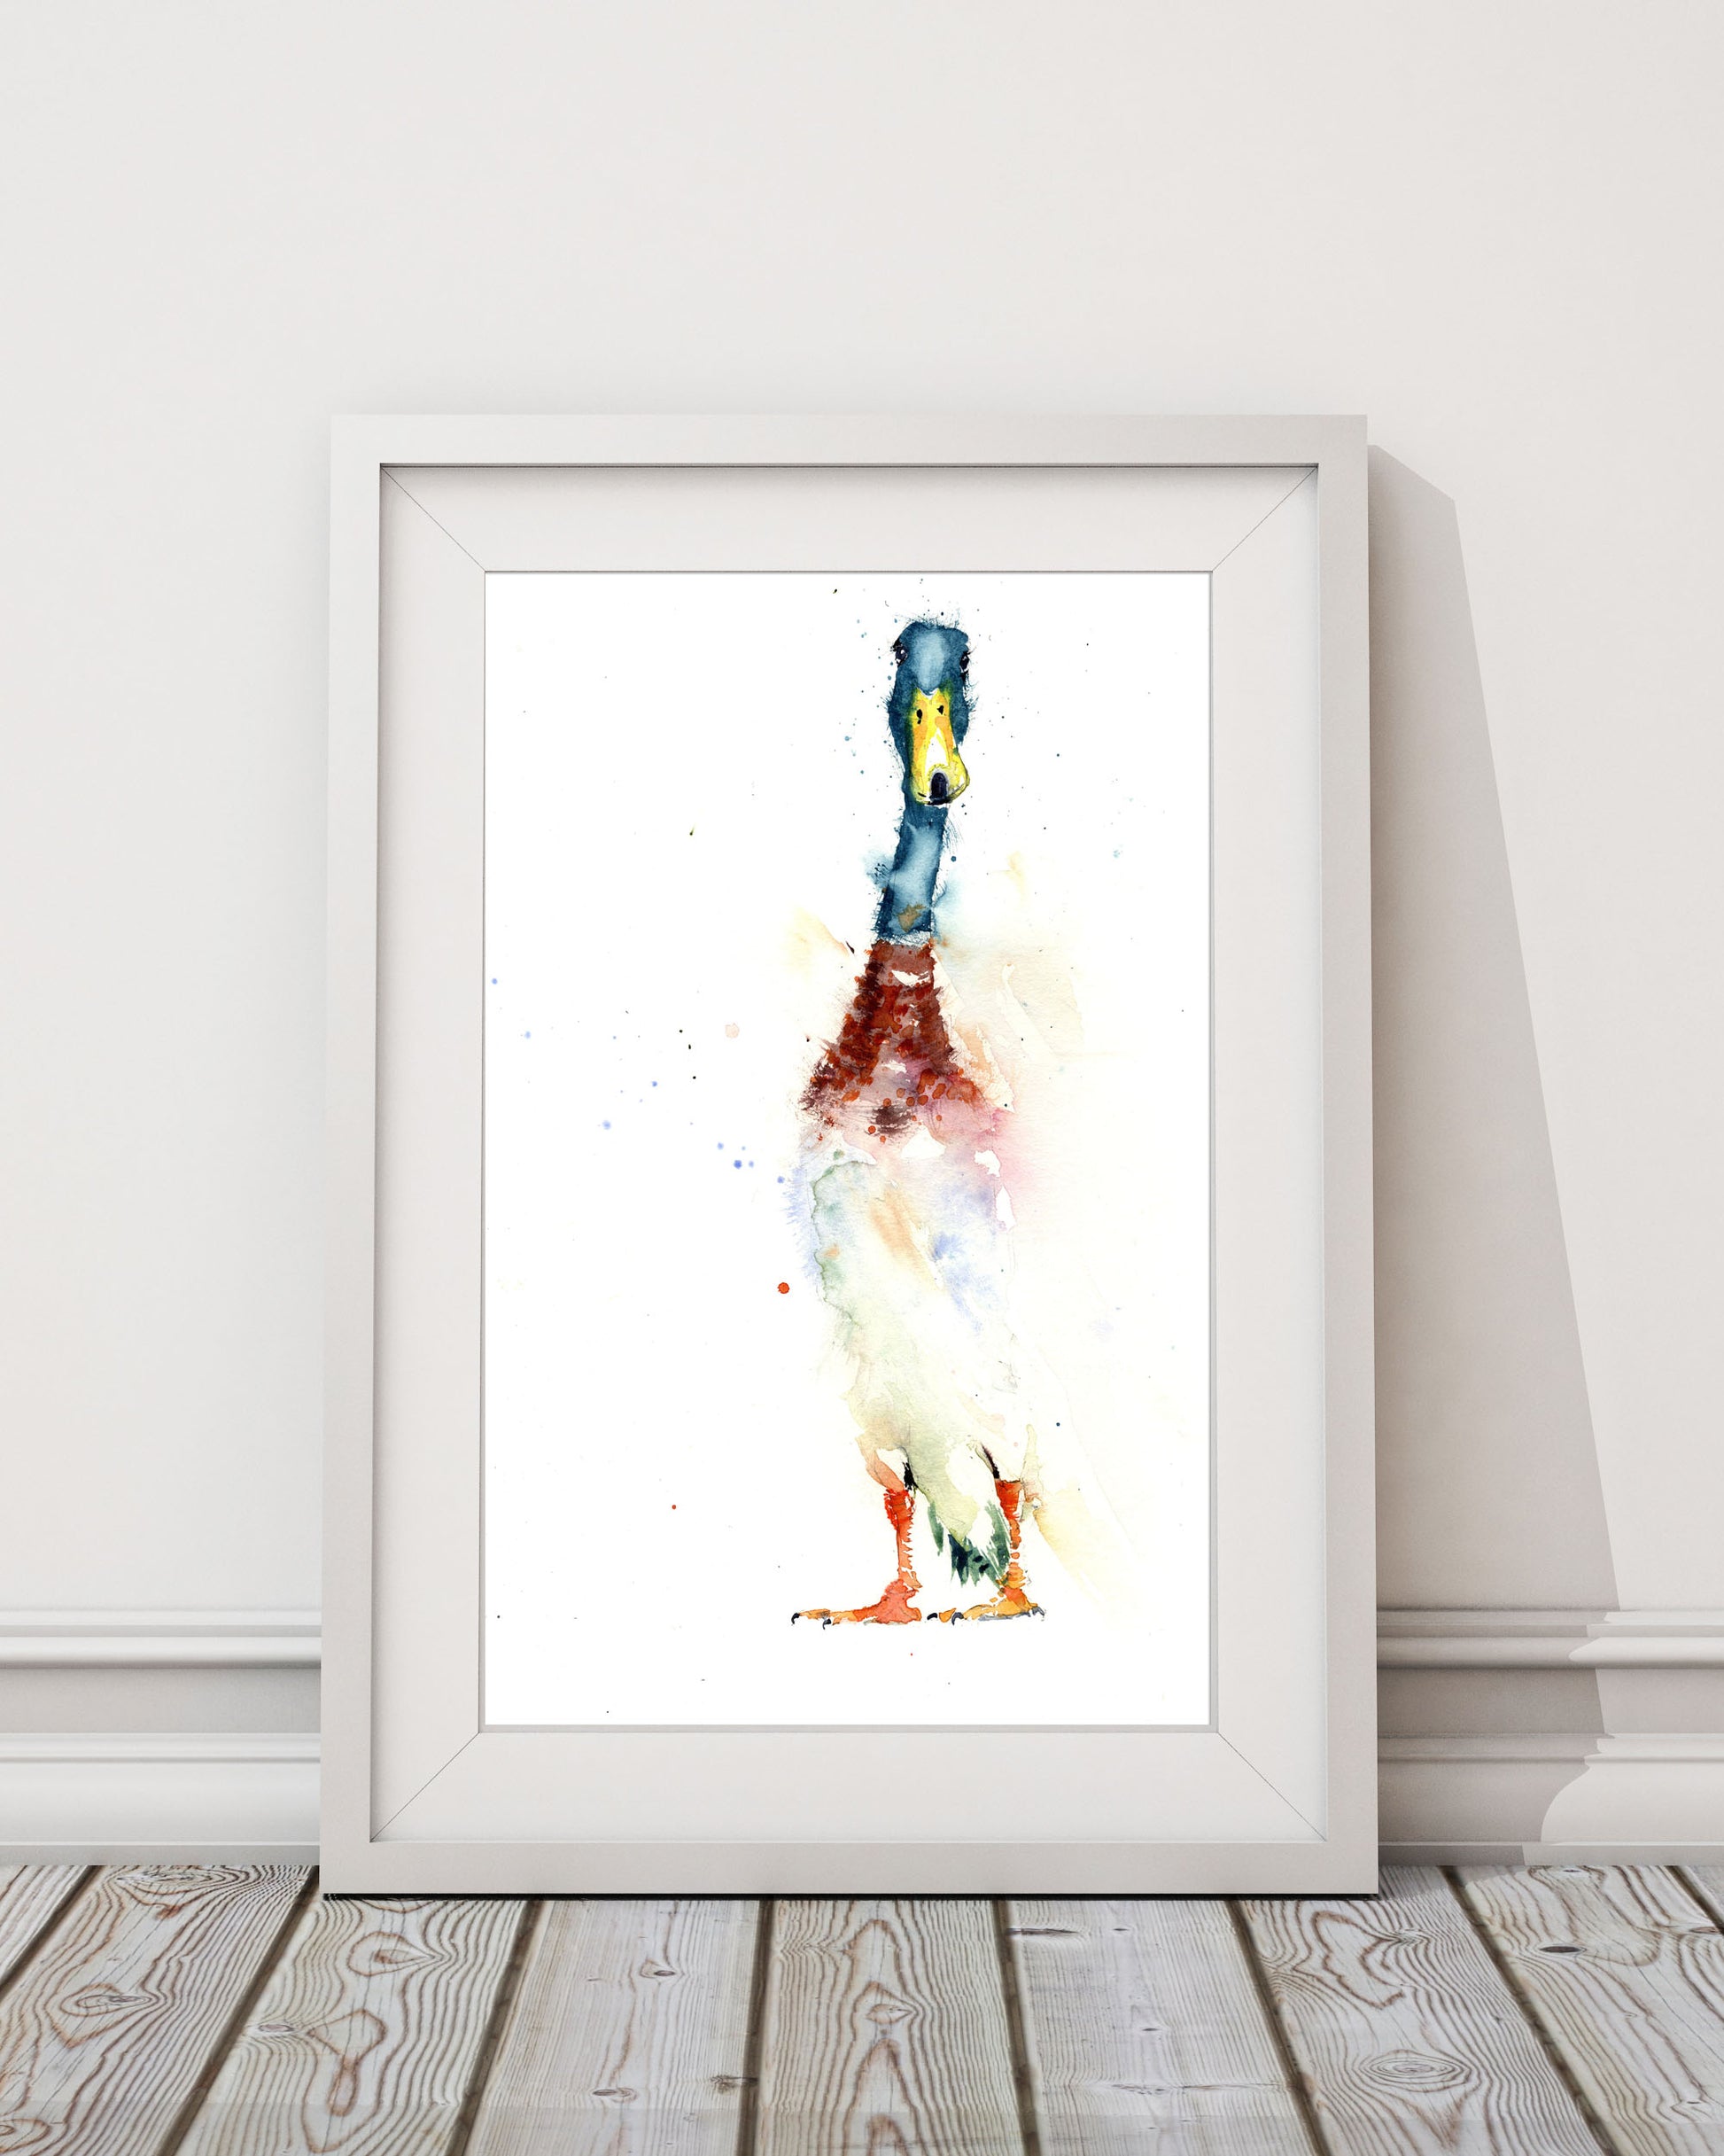 limited edition print  Indian runner DUCK - Jen Buckley Art limited edition animal art prints